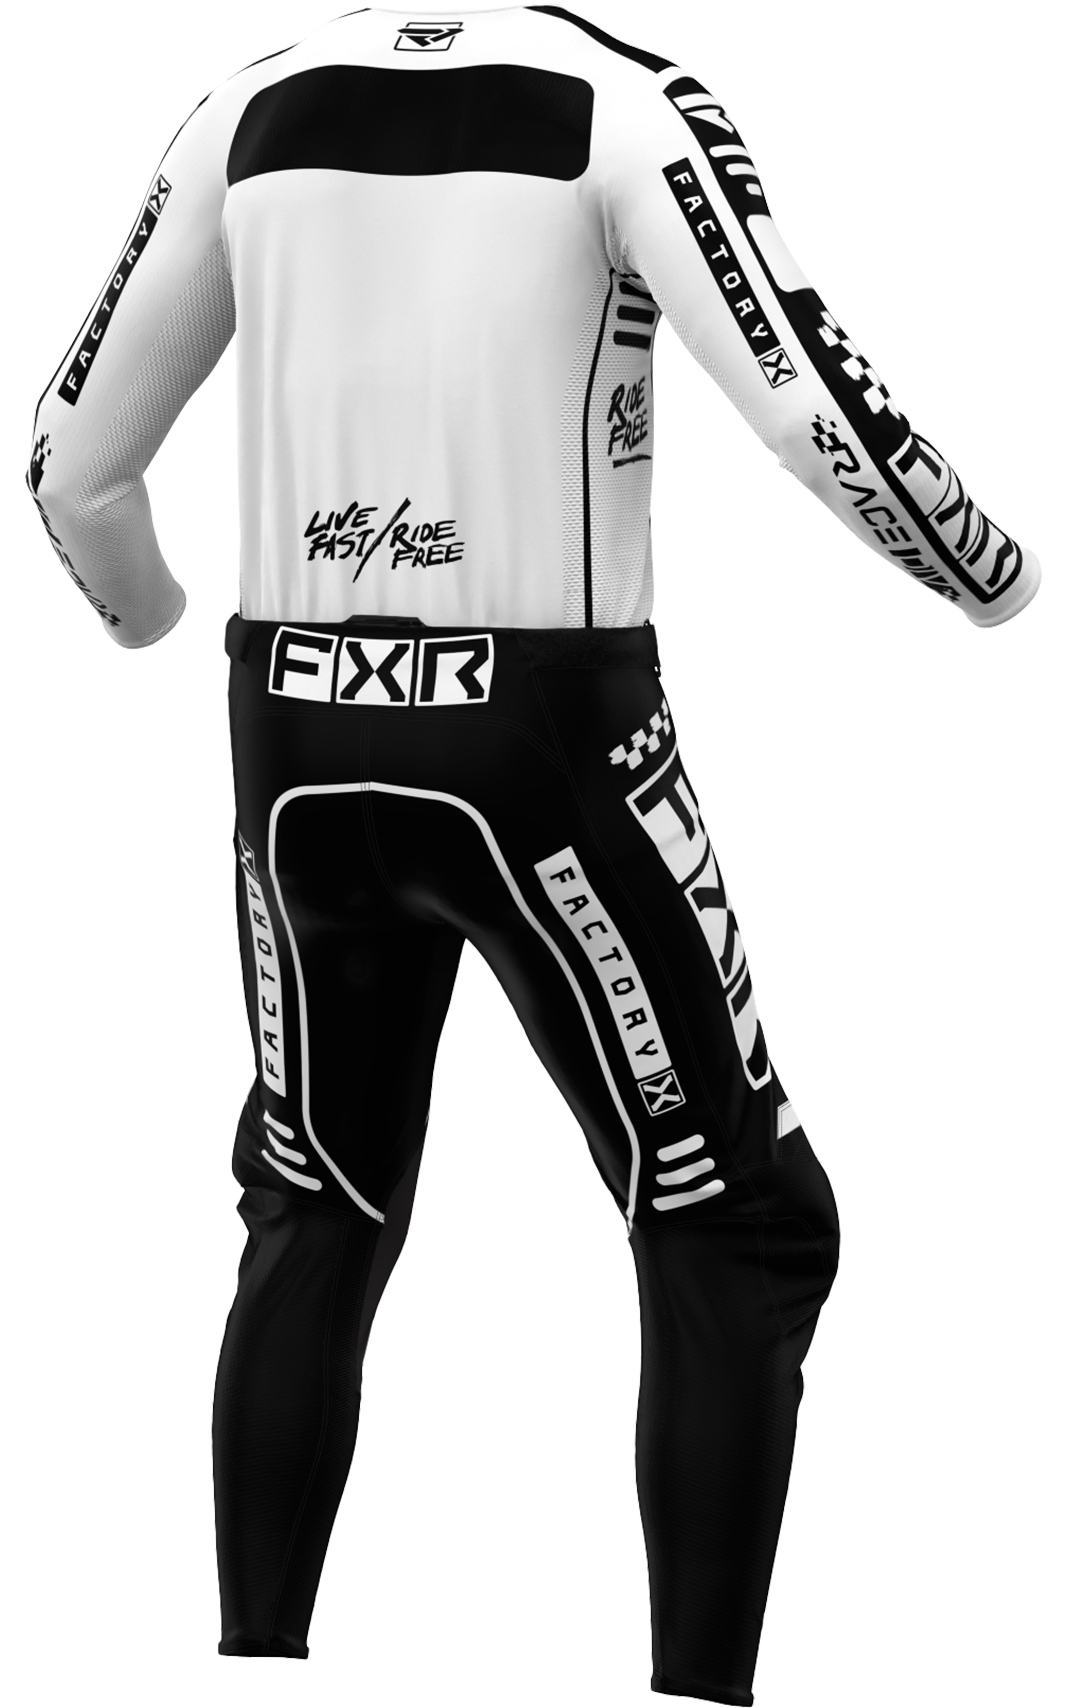 A 3D image of FXR's Nuoriso Podium Gladiator MX Jersey and Pant in White/Blackc olorway